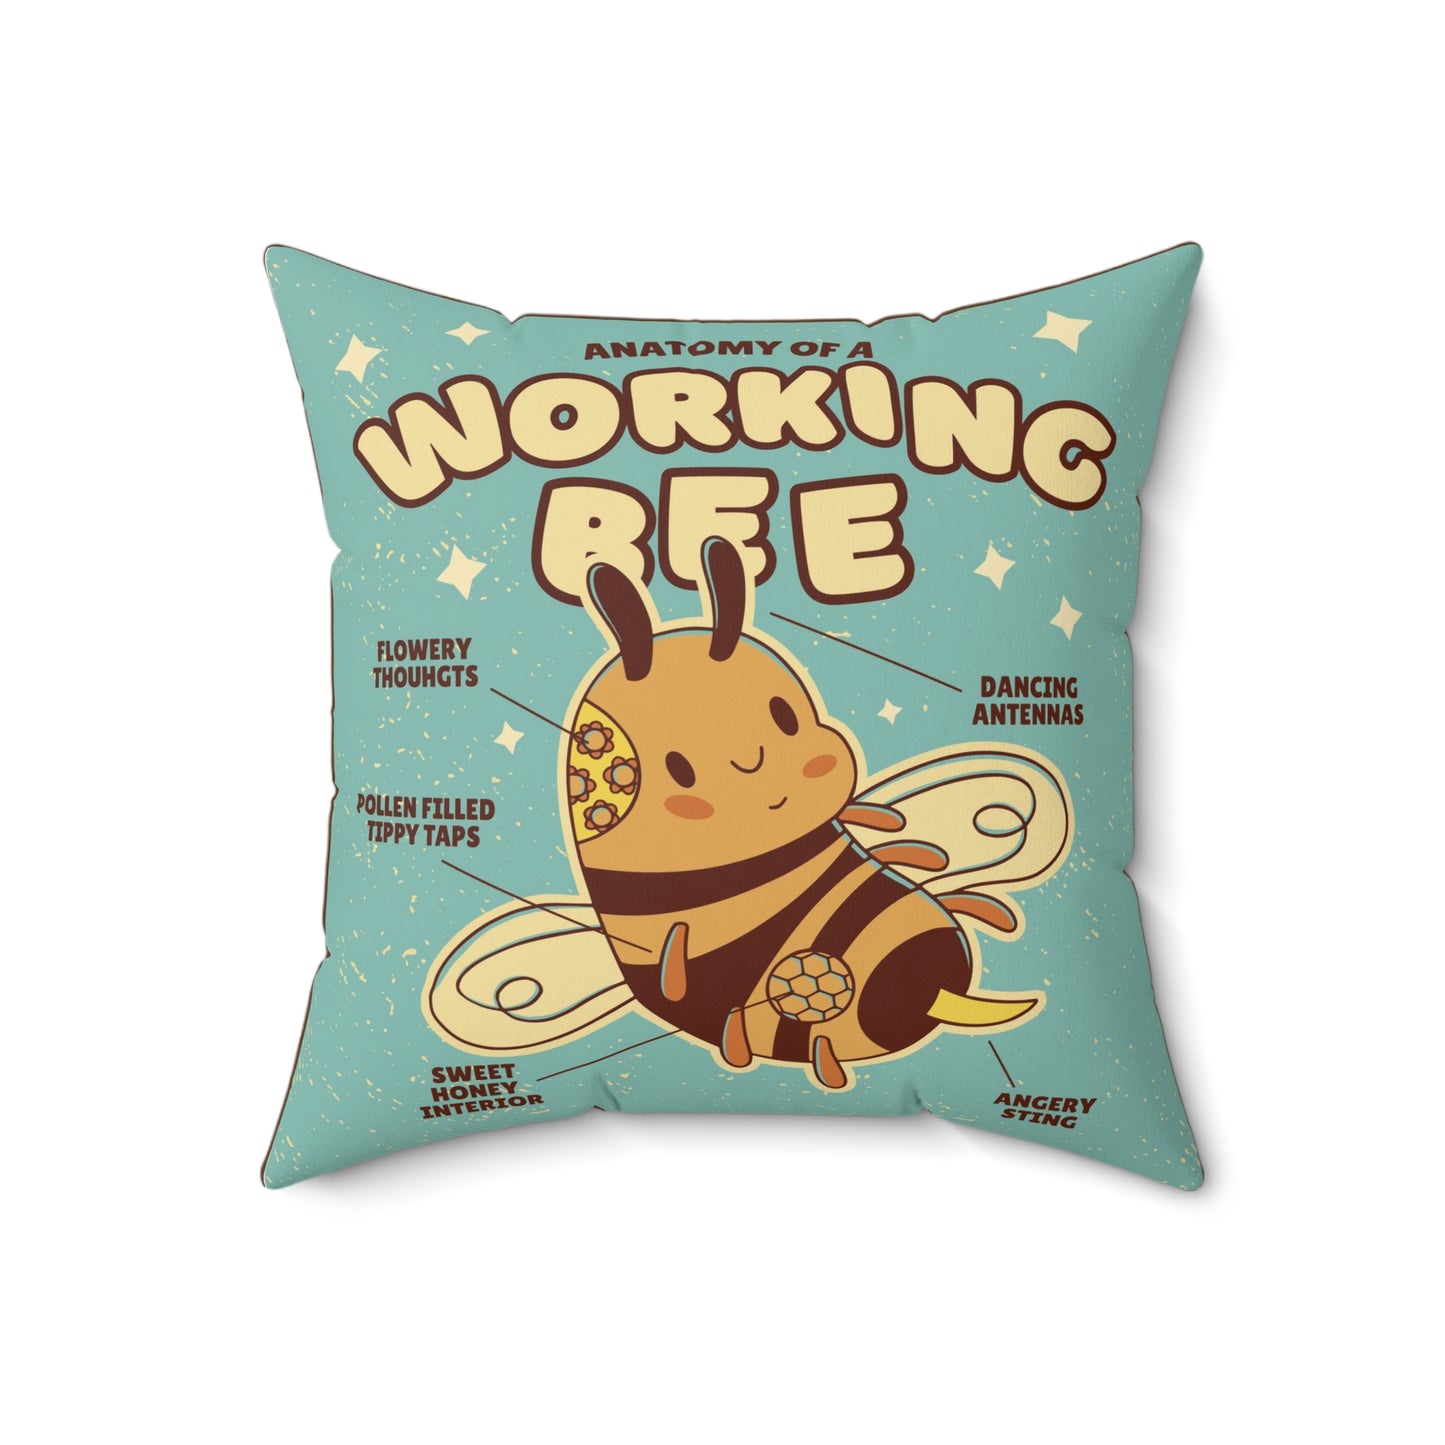 Anatomy of a Cute Working Bee Square Pillow